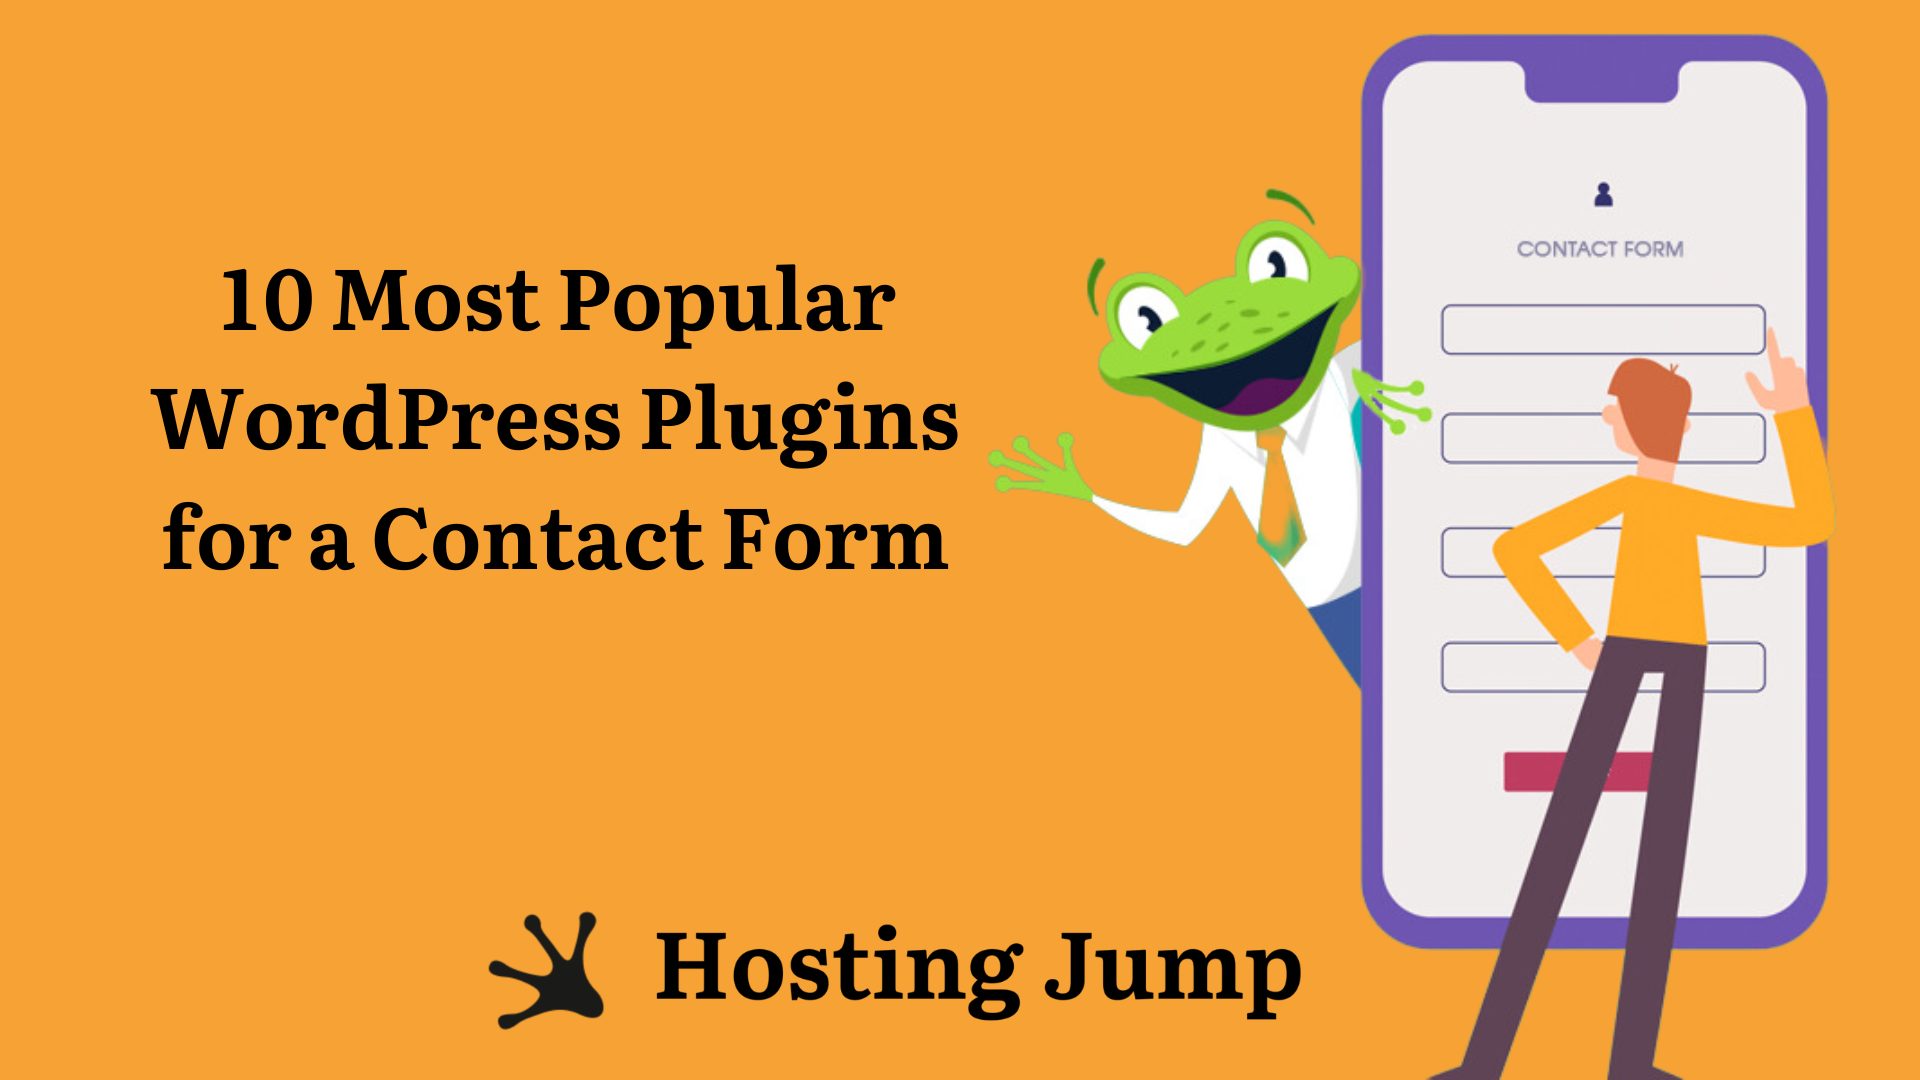 10 Most Popular WordPress Plugins for a Contact Form